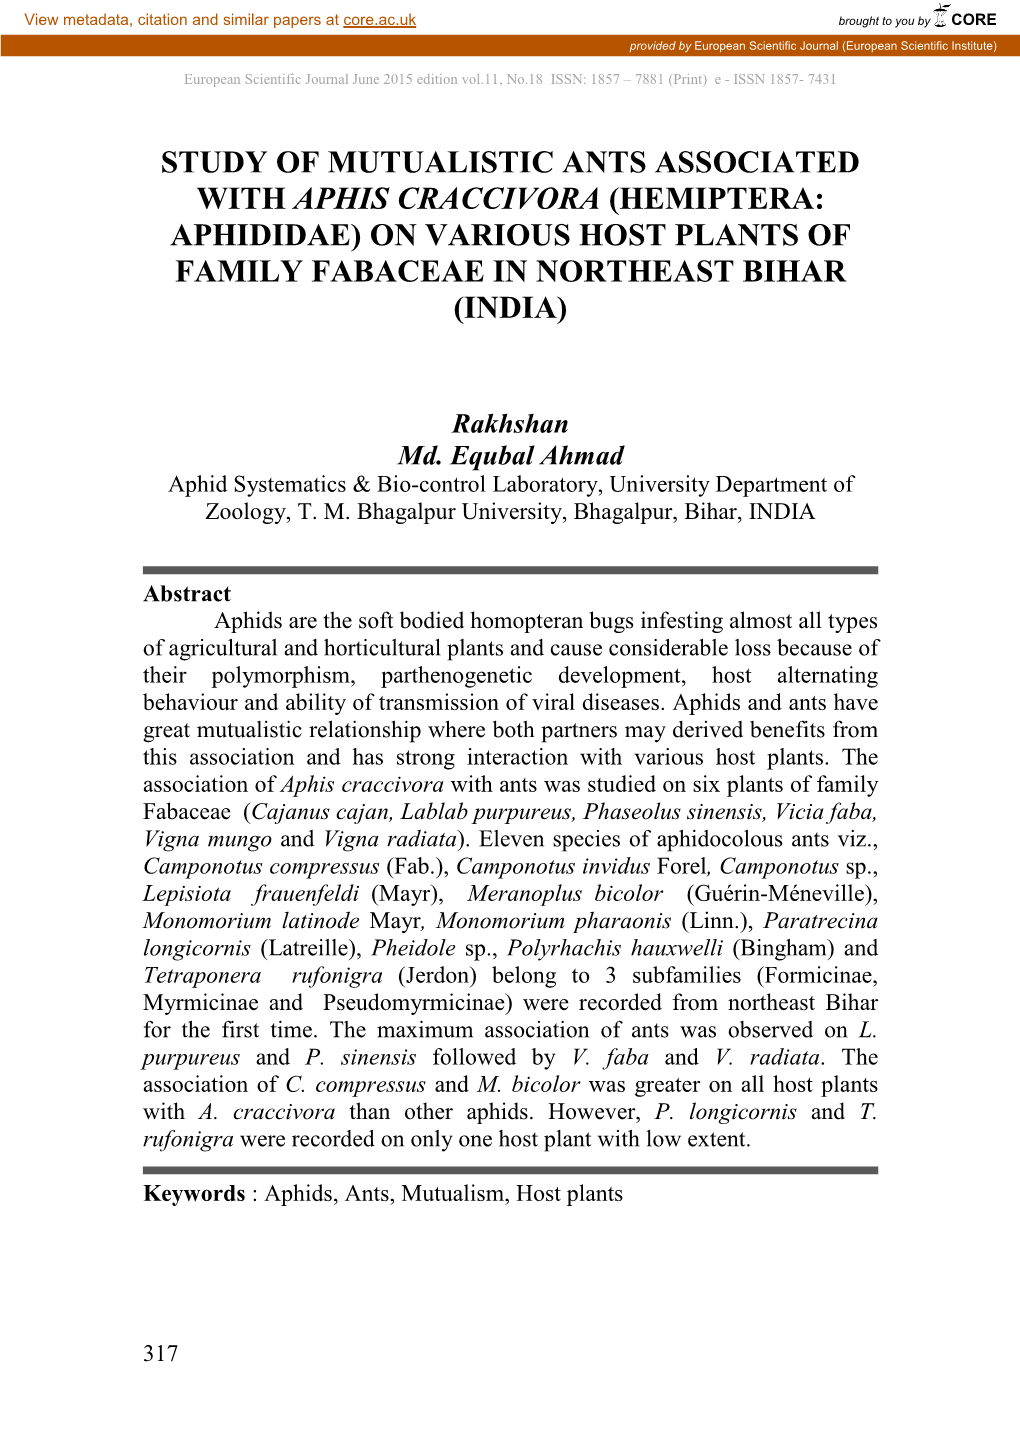 Study of Mutualistic Ants Associated with Aphis Craccivora (Hemiptera: Aphididae) on Various Host Plants of Family Fabaceae in Northeast Bihar (India)